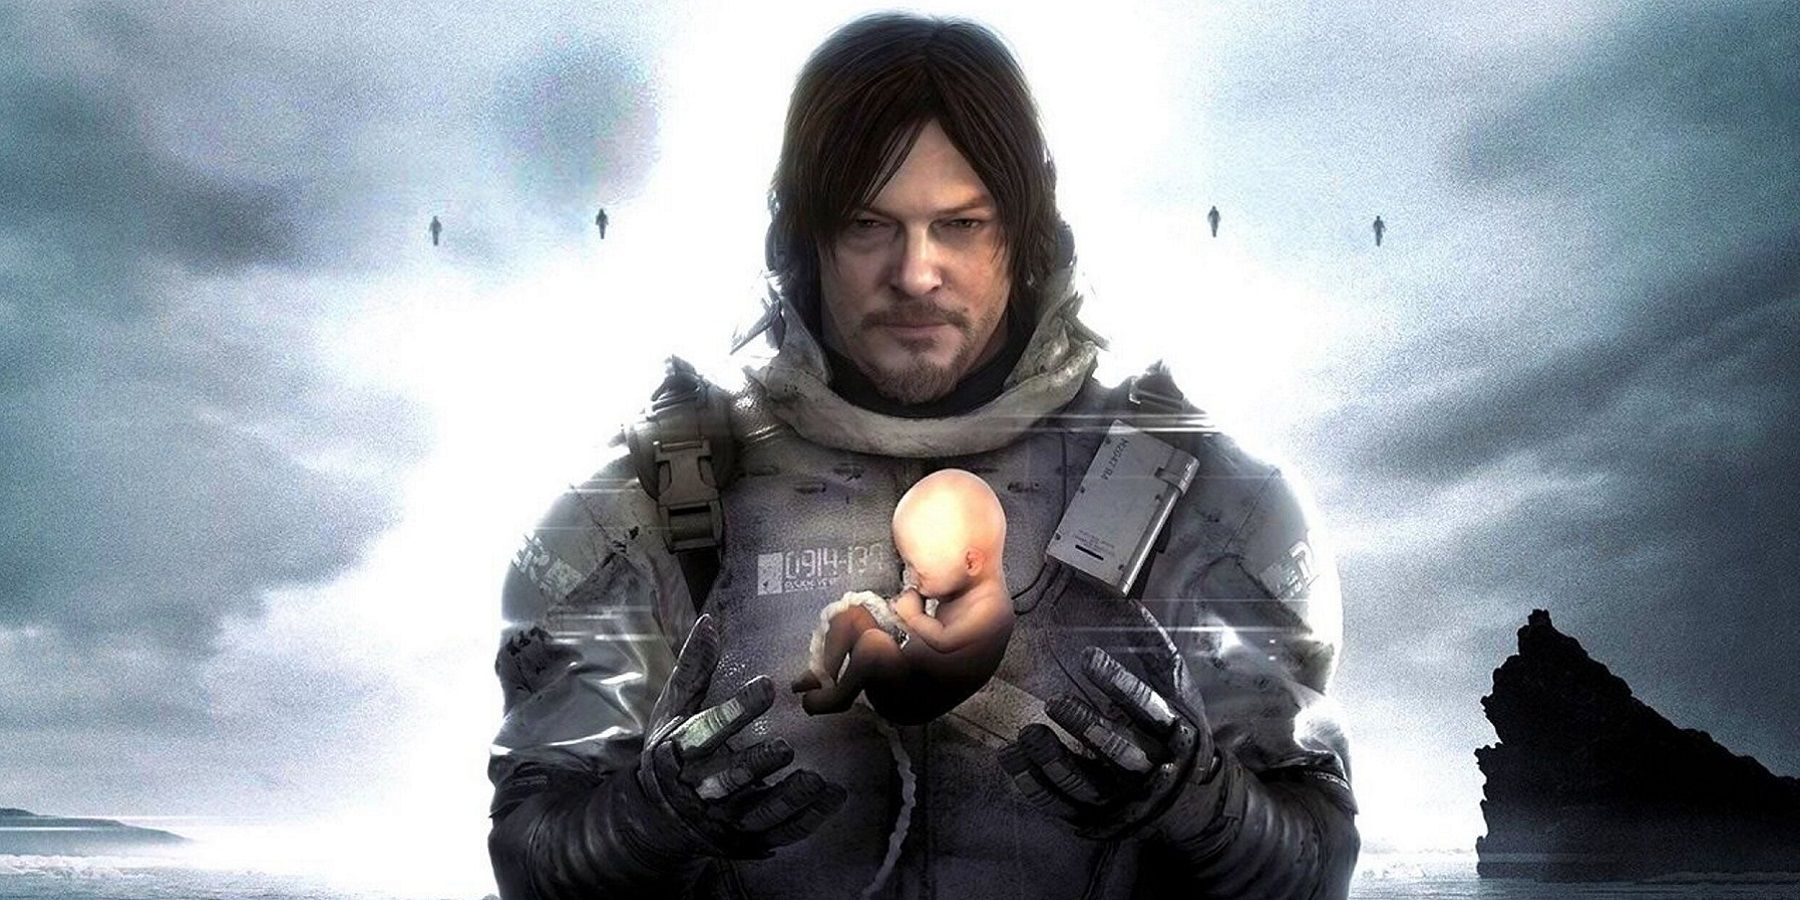 Image from Death Stranding showing protagonist Sam holding a newborn baby.